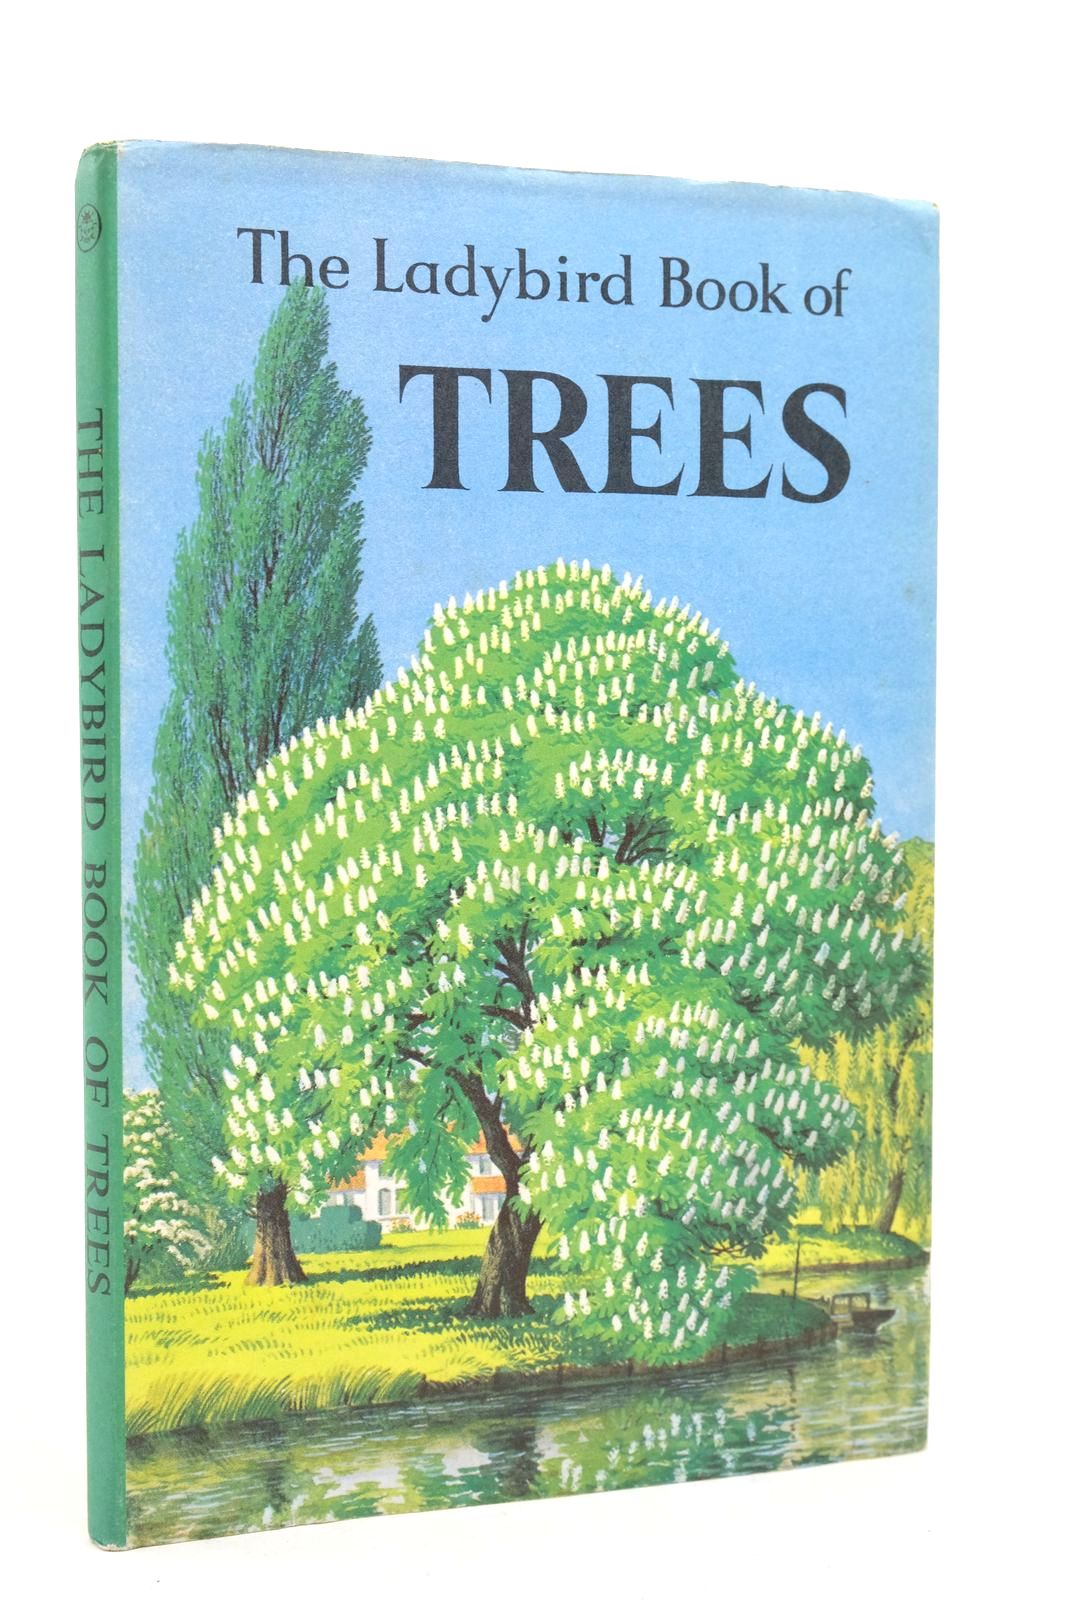 Photo of THE LADYBIRD BOOK OF TREES written by Vesey-Fitzgerald, Brian illustrated by Badmin, S.R. published by Wills &amp; Hepworth Ltd. (STOCK CODE: 2139708)  for sale by Stella & Rose's Books